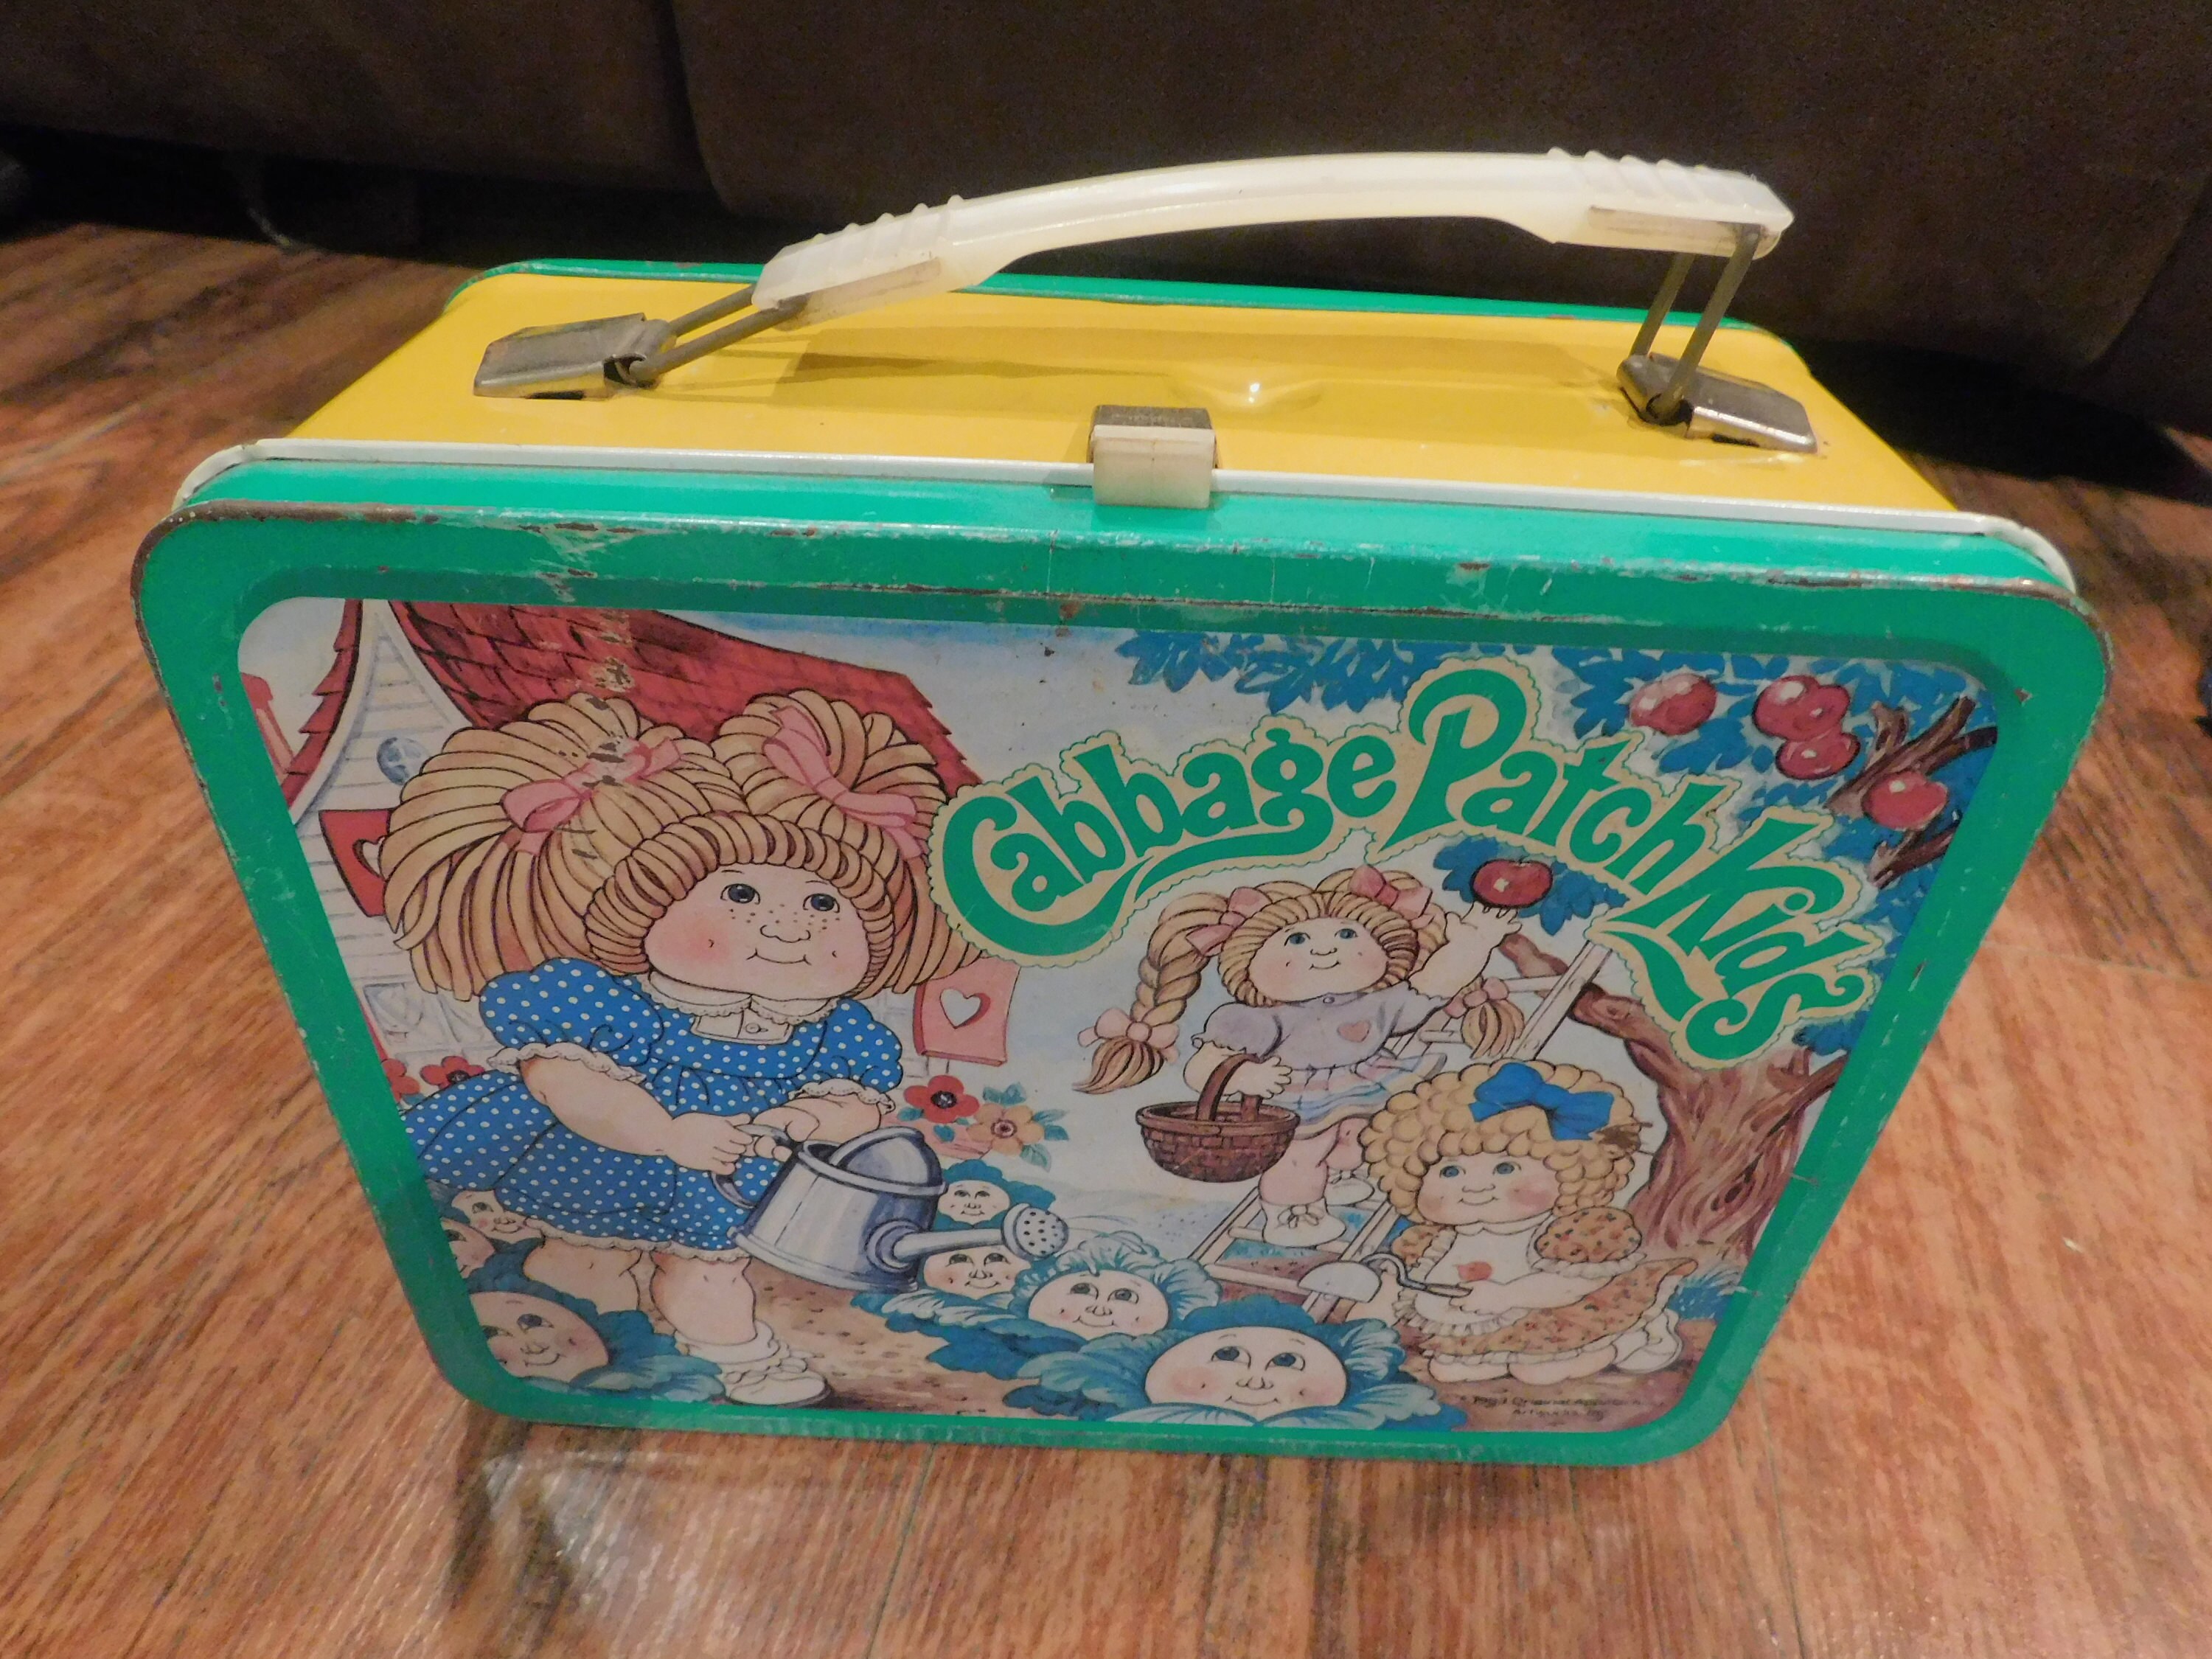 1985 Cabbage Patch Kids Plastic Lunchbox with Thermos